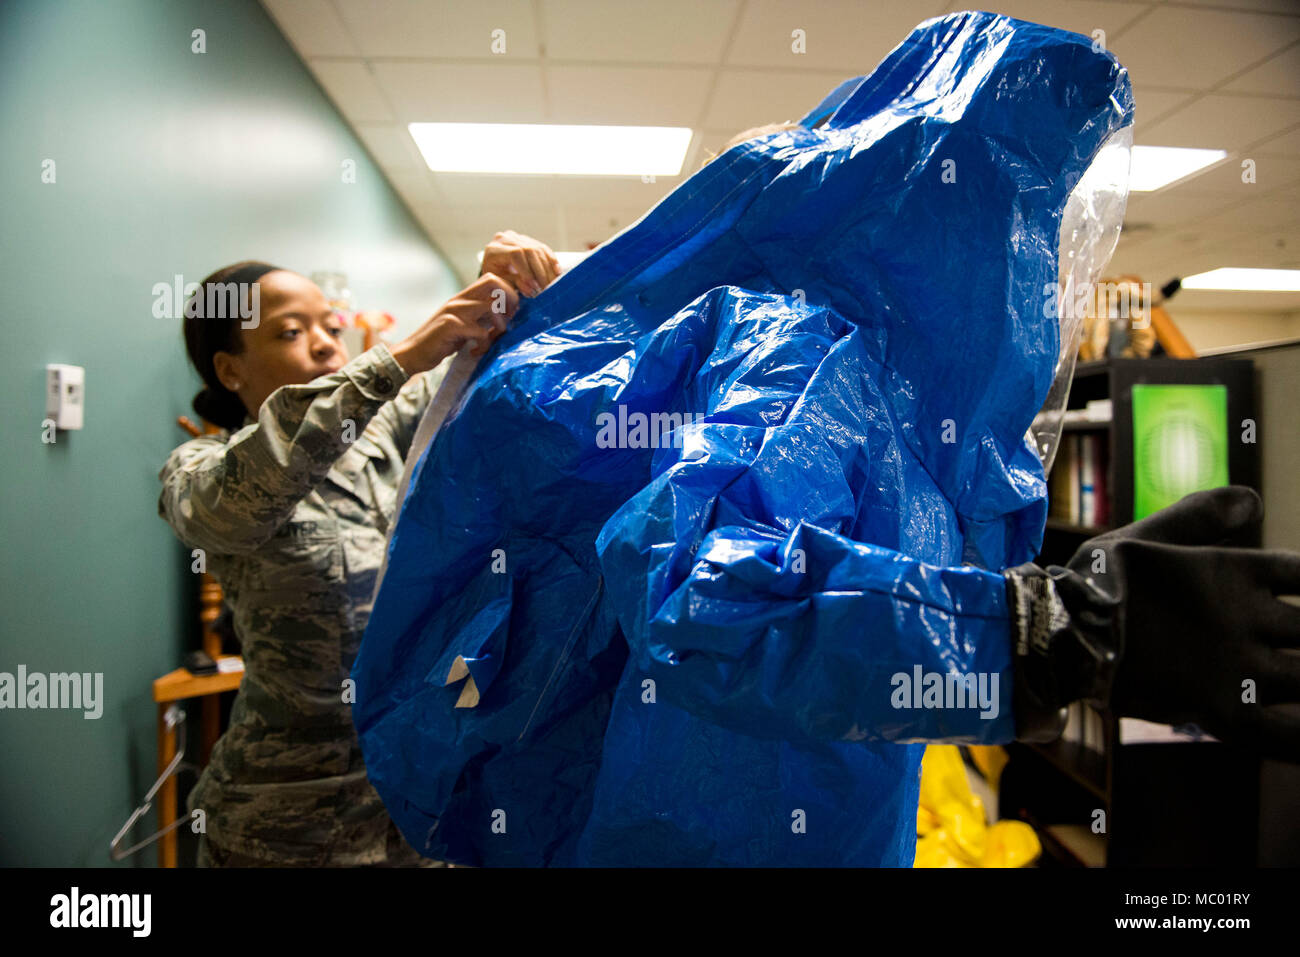 Airman 1st Class Briana McIver, left, 23d Aerospace Medicine Squadron (AMDS) bioenvironmental engineering apprentice, secures 2nd Lt. Eric Olson, 23d AMDS bioenvironmental engineer, in a Level A suit during readiness training, Jan. 12, 2018, at Moody Air Force Base, Ga. A Level A suit is designed to protect the user against any biological threat. The Bioenvironmental Engineering Flight tested their response capabilities in a simulated contamination scenario. Bioenvironmental engineering specialists focus on reducing health hazards in the workplace and surrounding areas. (U.S. Air Force photo b Stock Photo